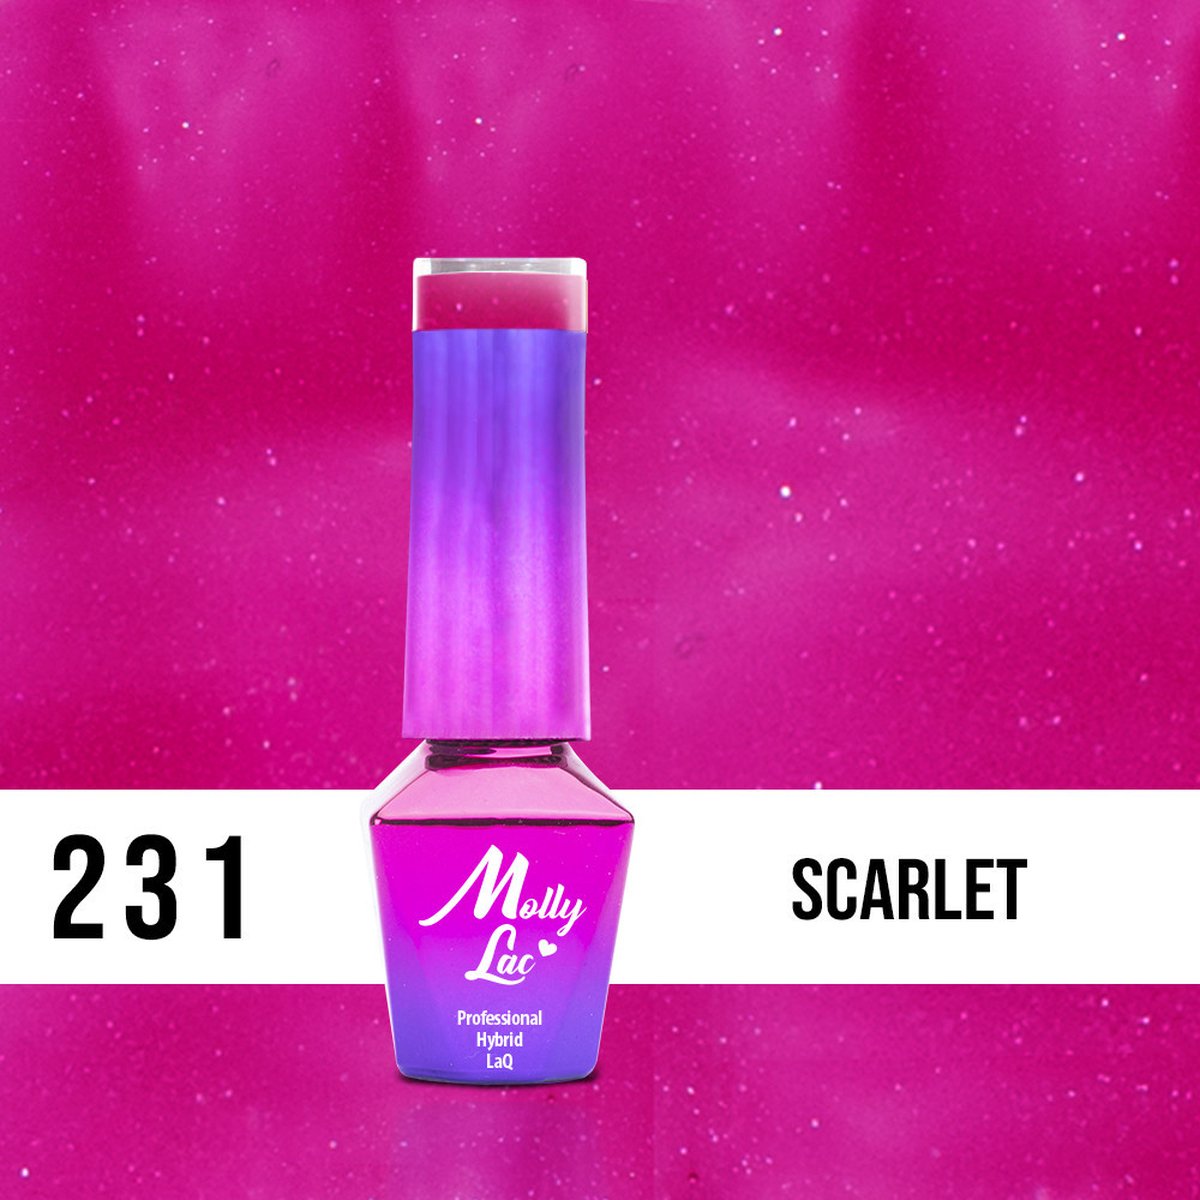 Molly Lac Glowing time - Scarlet nr 231 5ml